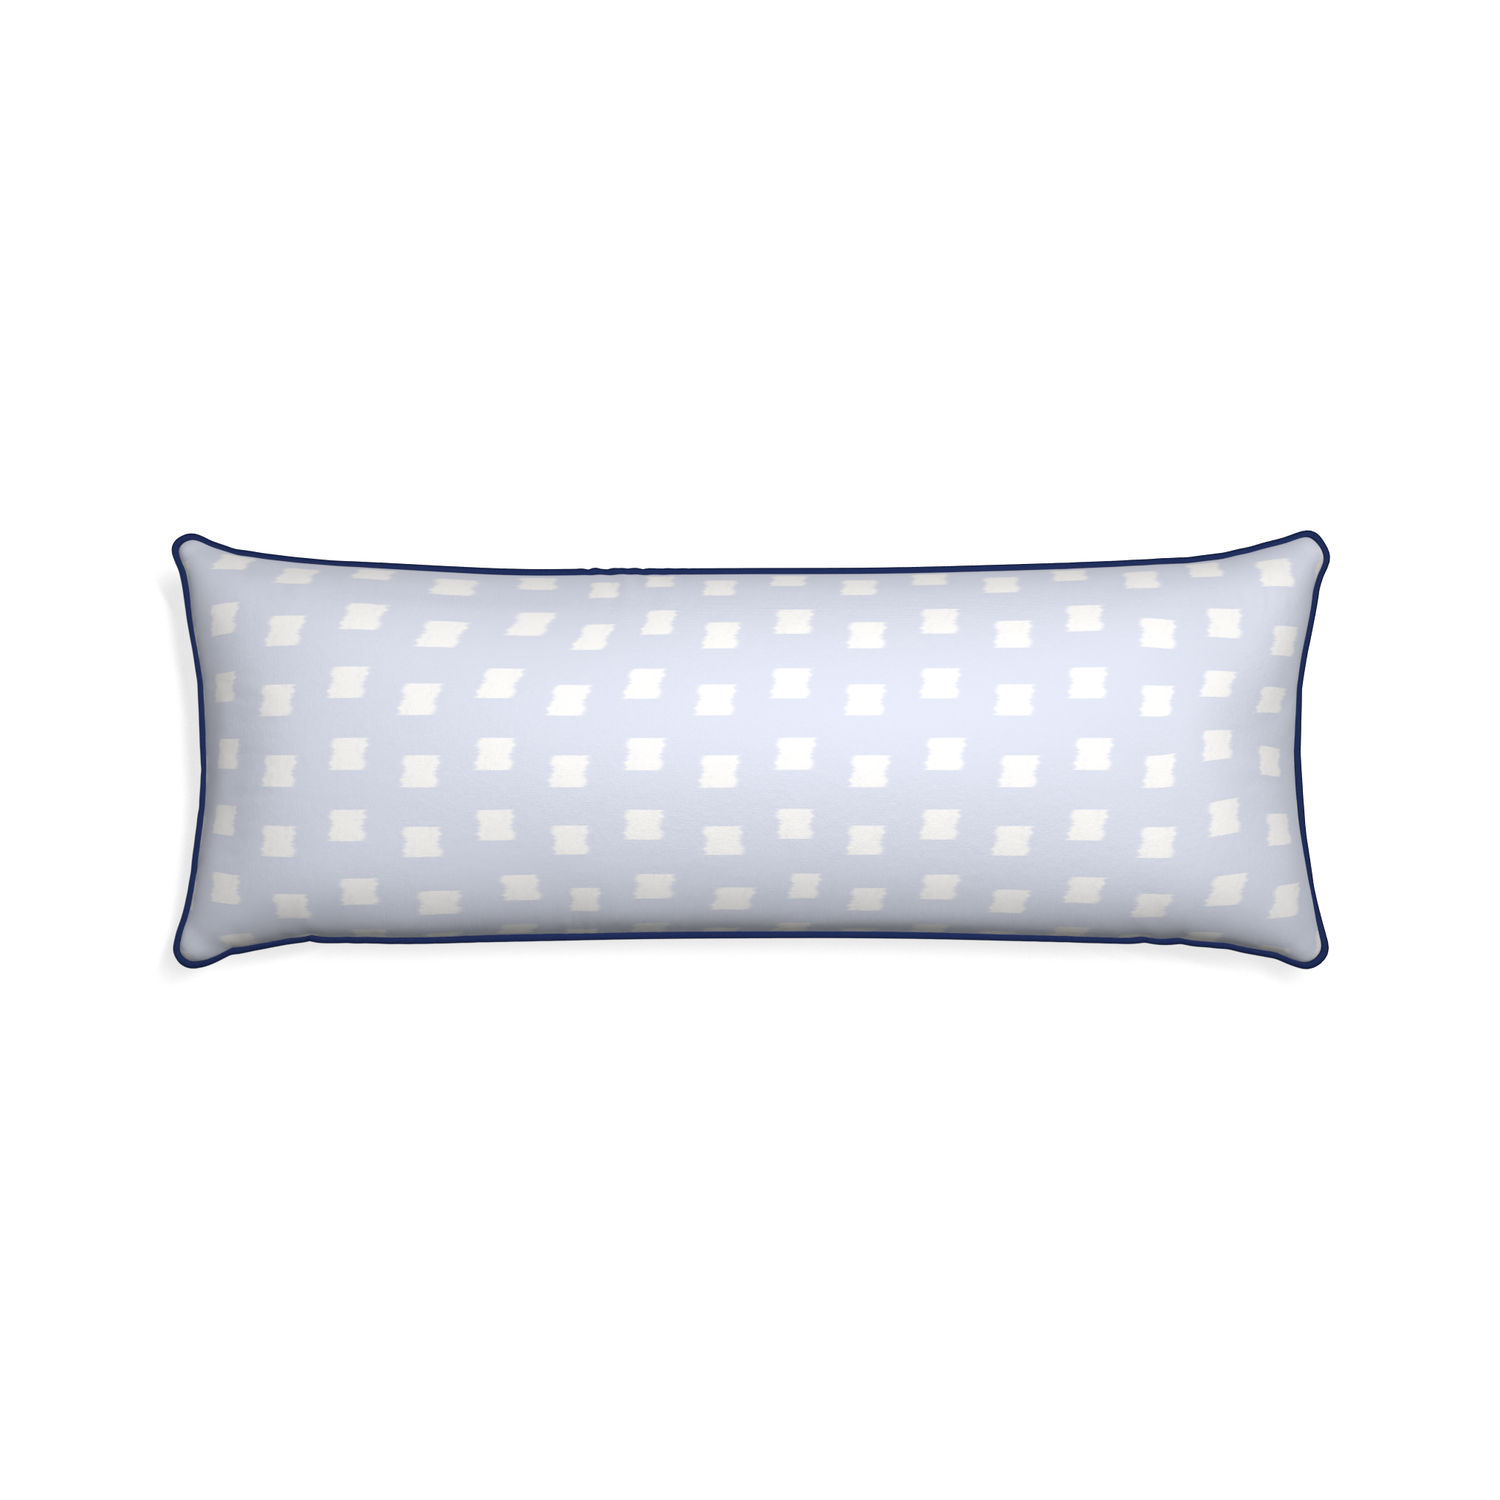 Xl-lumbar denton custom sky blue patternpillow with midnight piping on white background